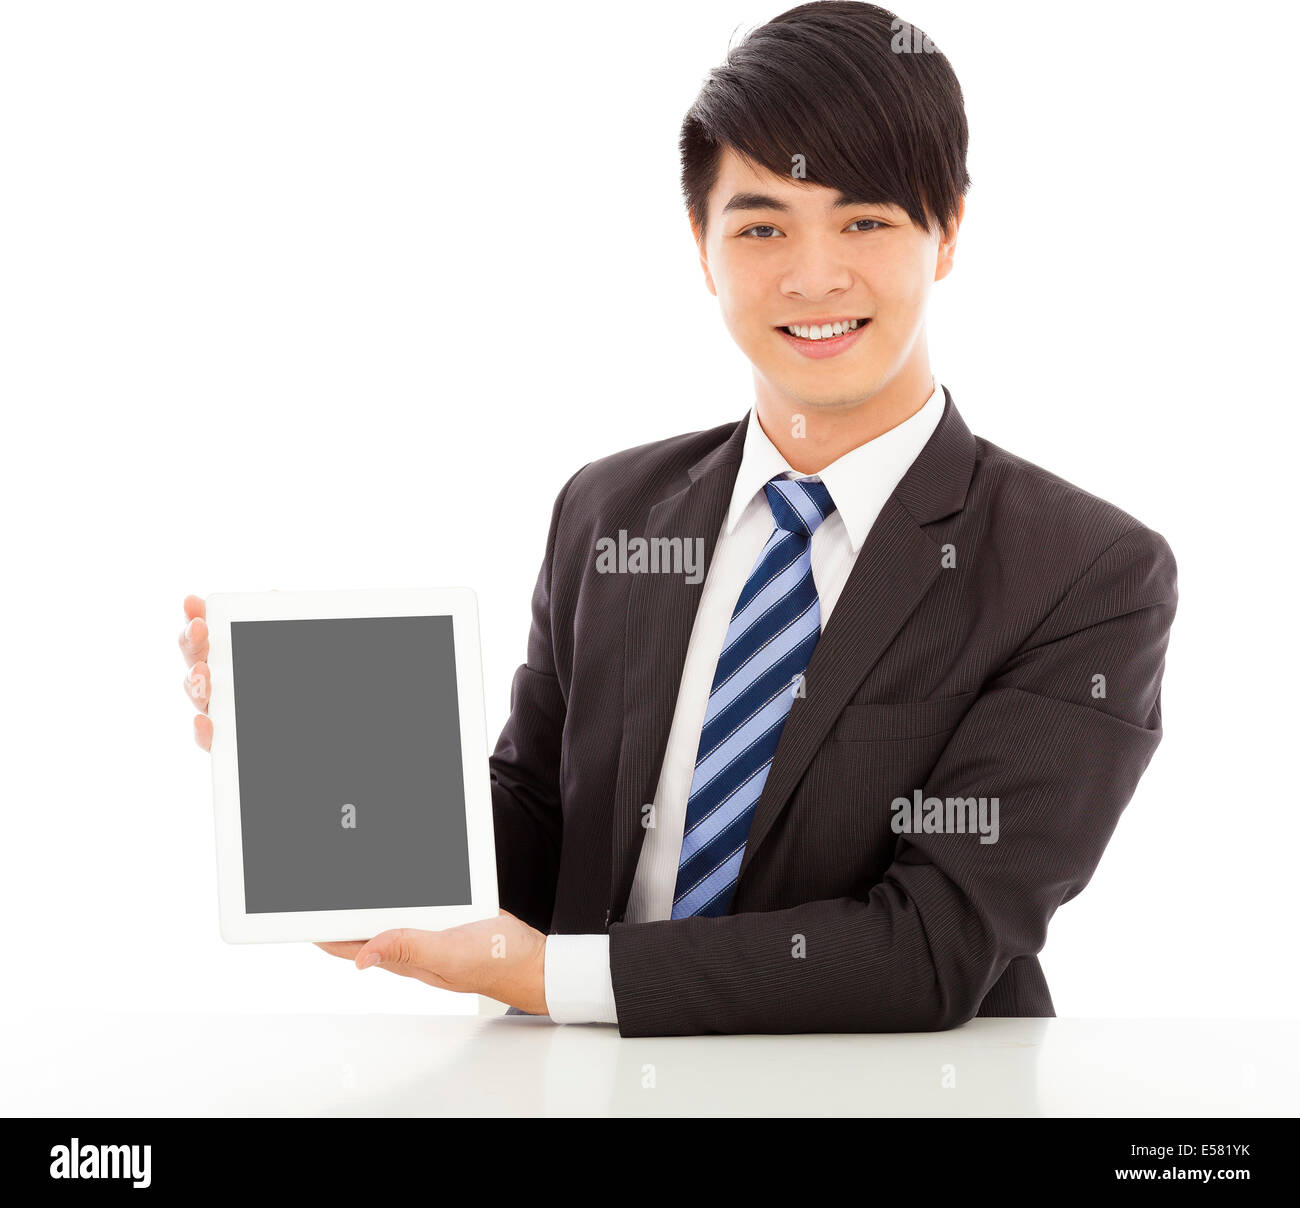 professional business man using a tablet to display Stock Photo